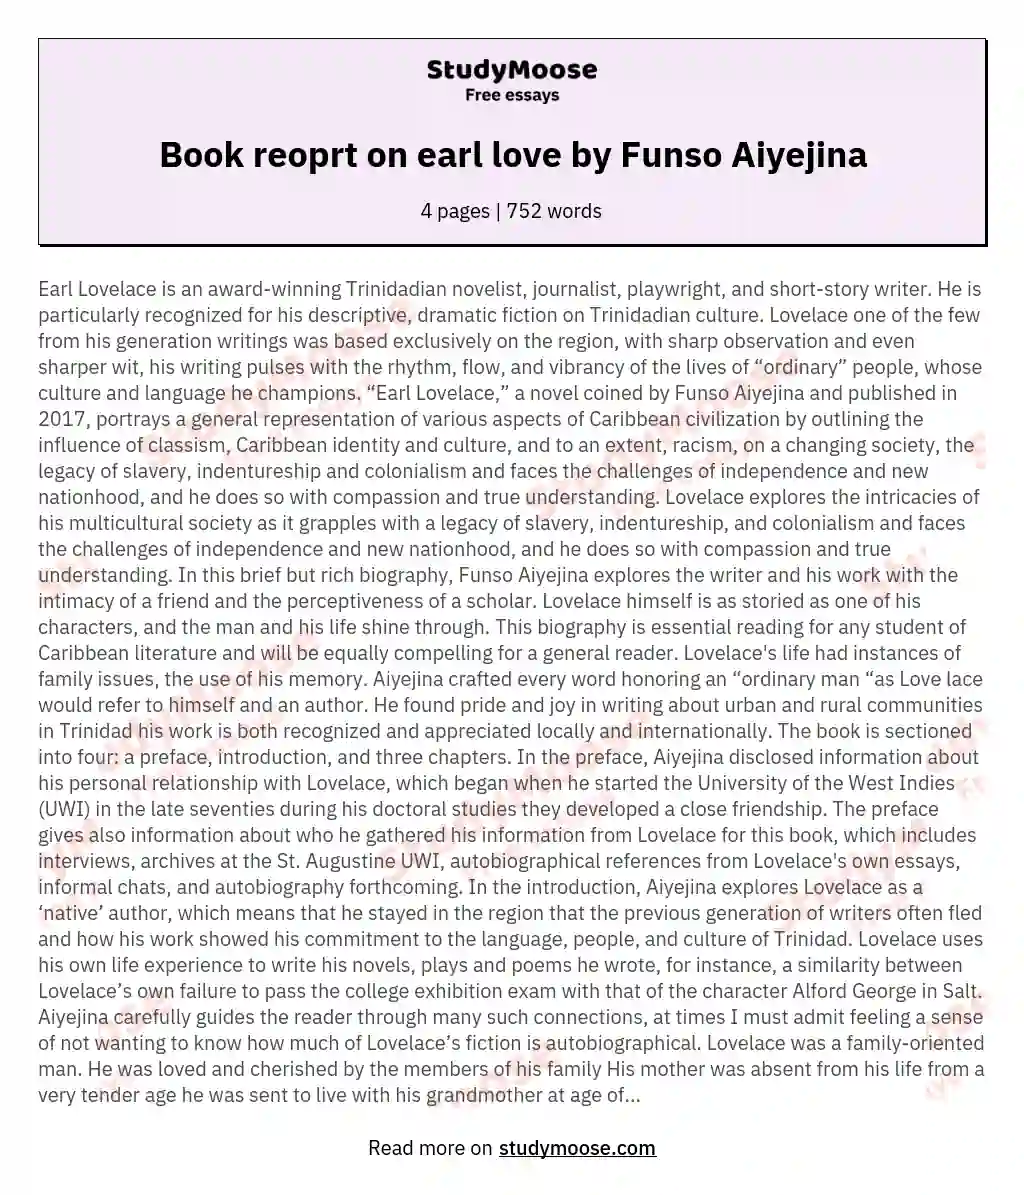 Book reoprt on earl love by Funso Aiyejina essay